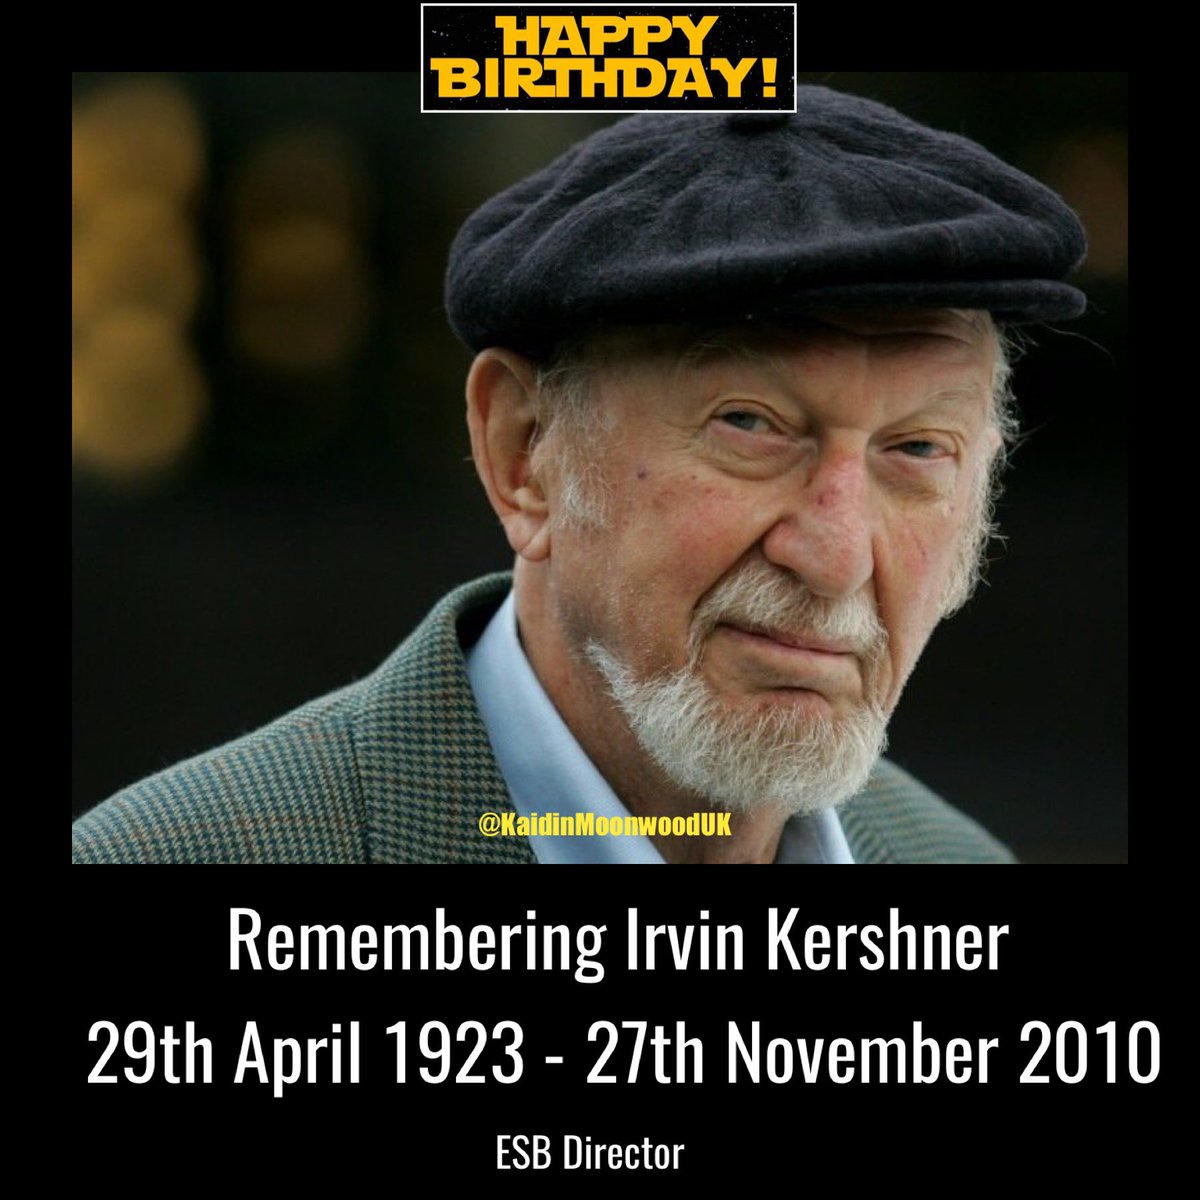 Remembering Irvin Kershner, director of The Empire Strikes Back. 
29th April 1923 to 27th November 2010.
#StarWarsBirthday #IrvinKershner #StarWars #Director #TheEmpireStrikesBack #AtOneWithTheForce
starwars.wikia.com/wiki/Irvin_Ker…